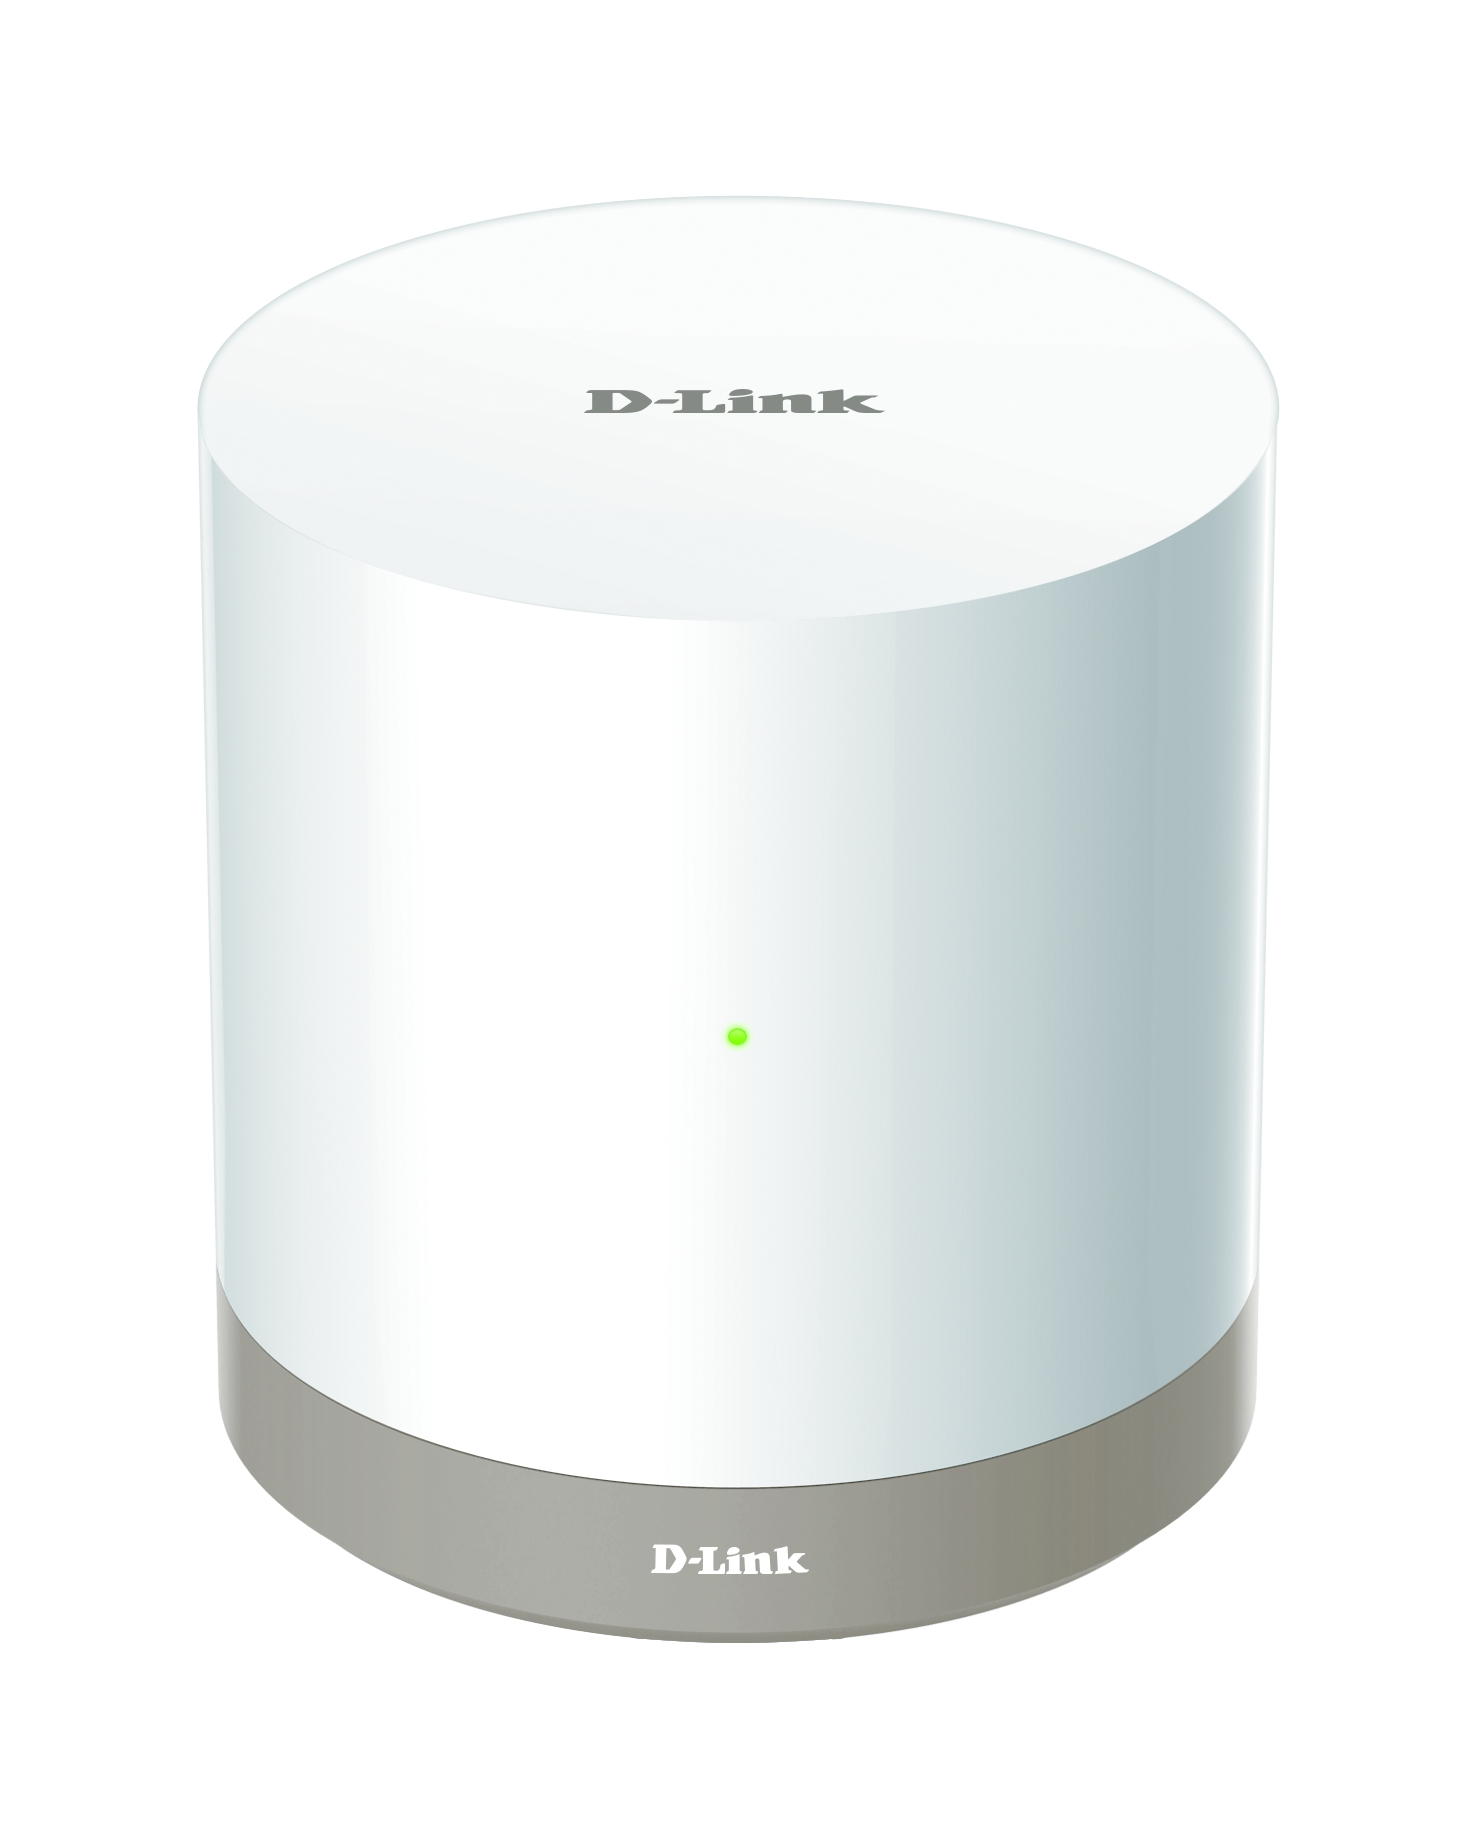 mydlink Connected Home Hub